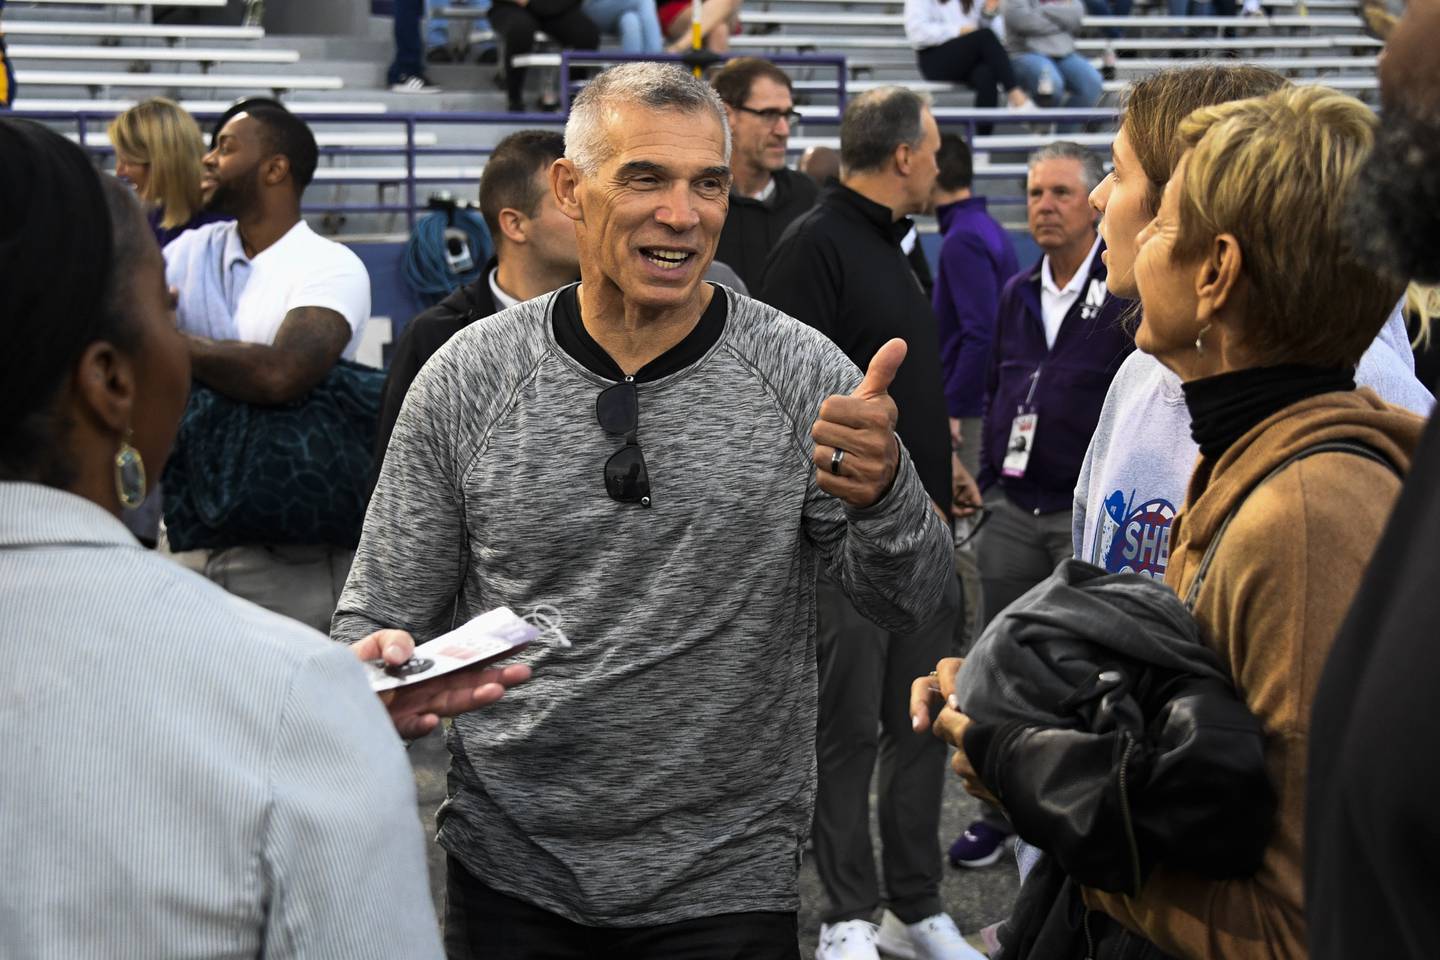 Joe Girardi stands on the sideline before a Northwestern football game on Sept. 24, 2022.